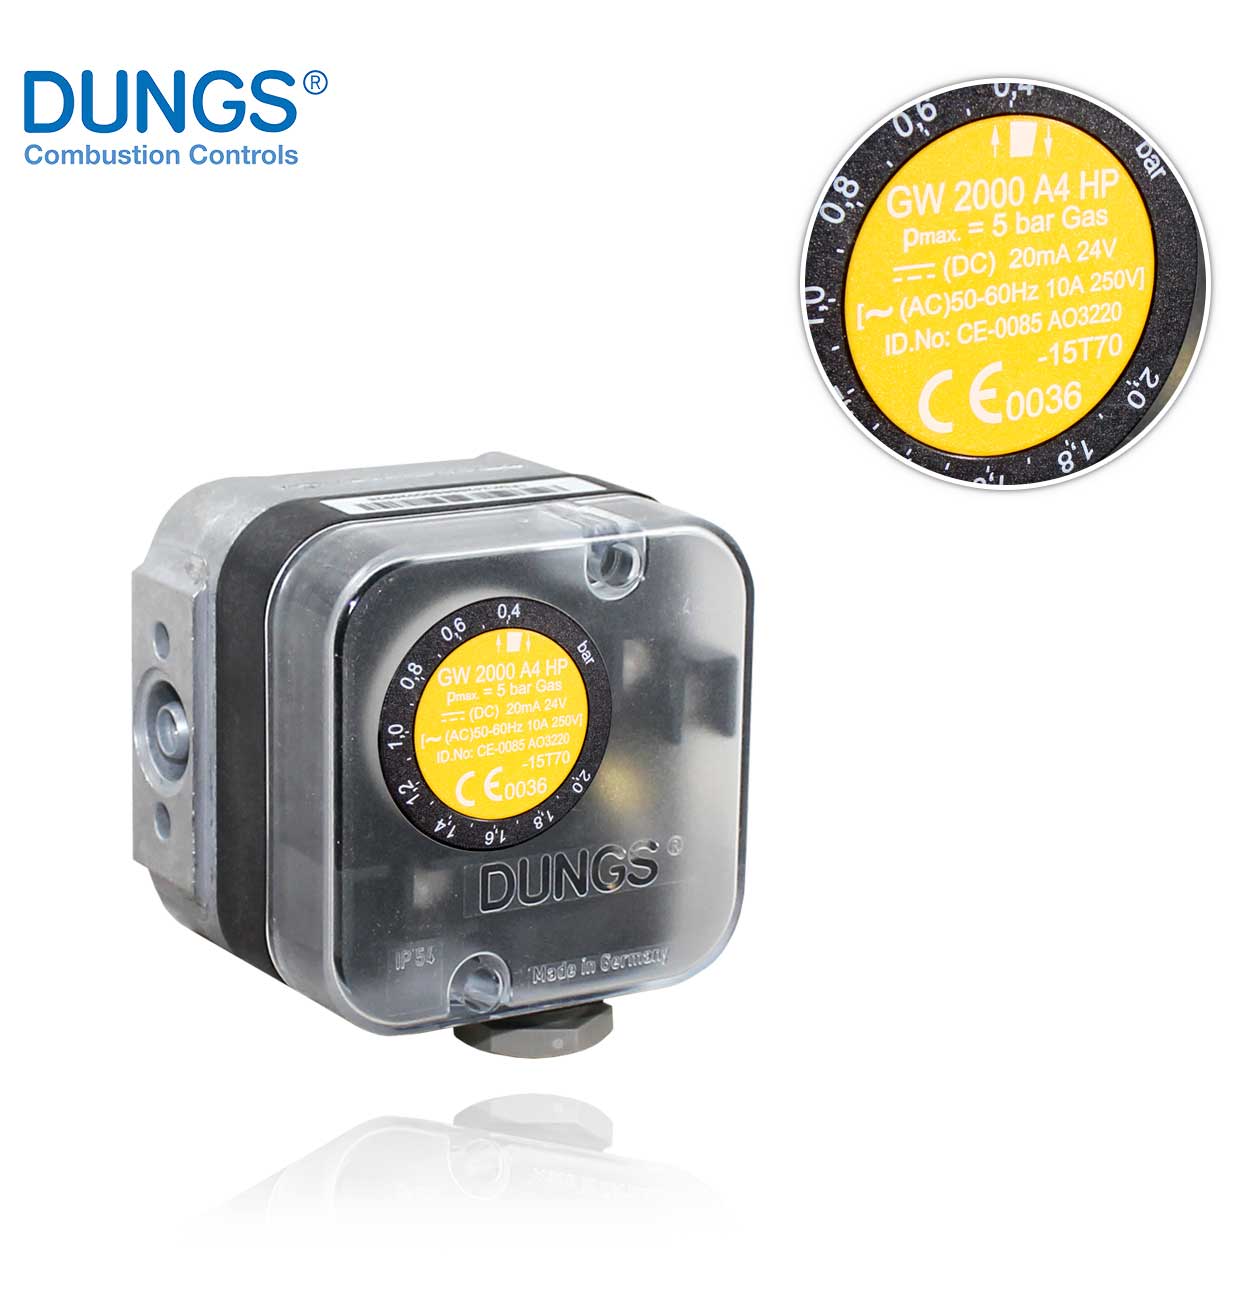 GW 2000 A4 HP IP54 400-2000mbar DUNGS PRESSURE SWITCH